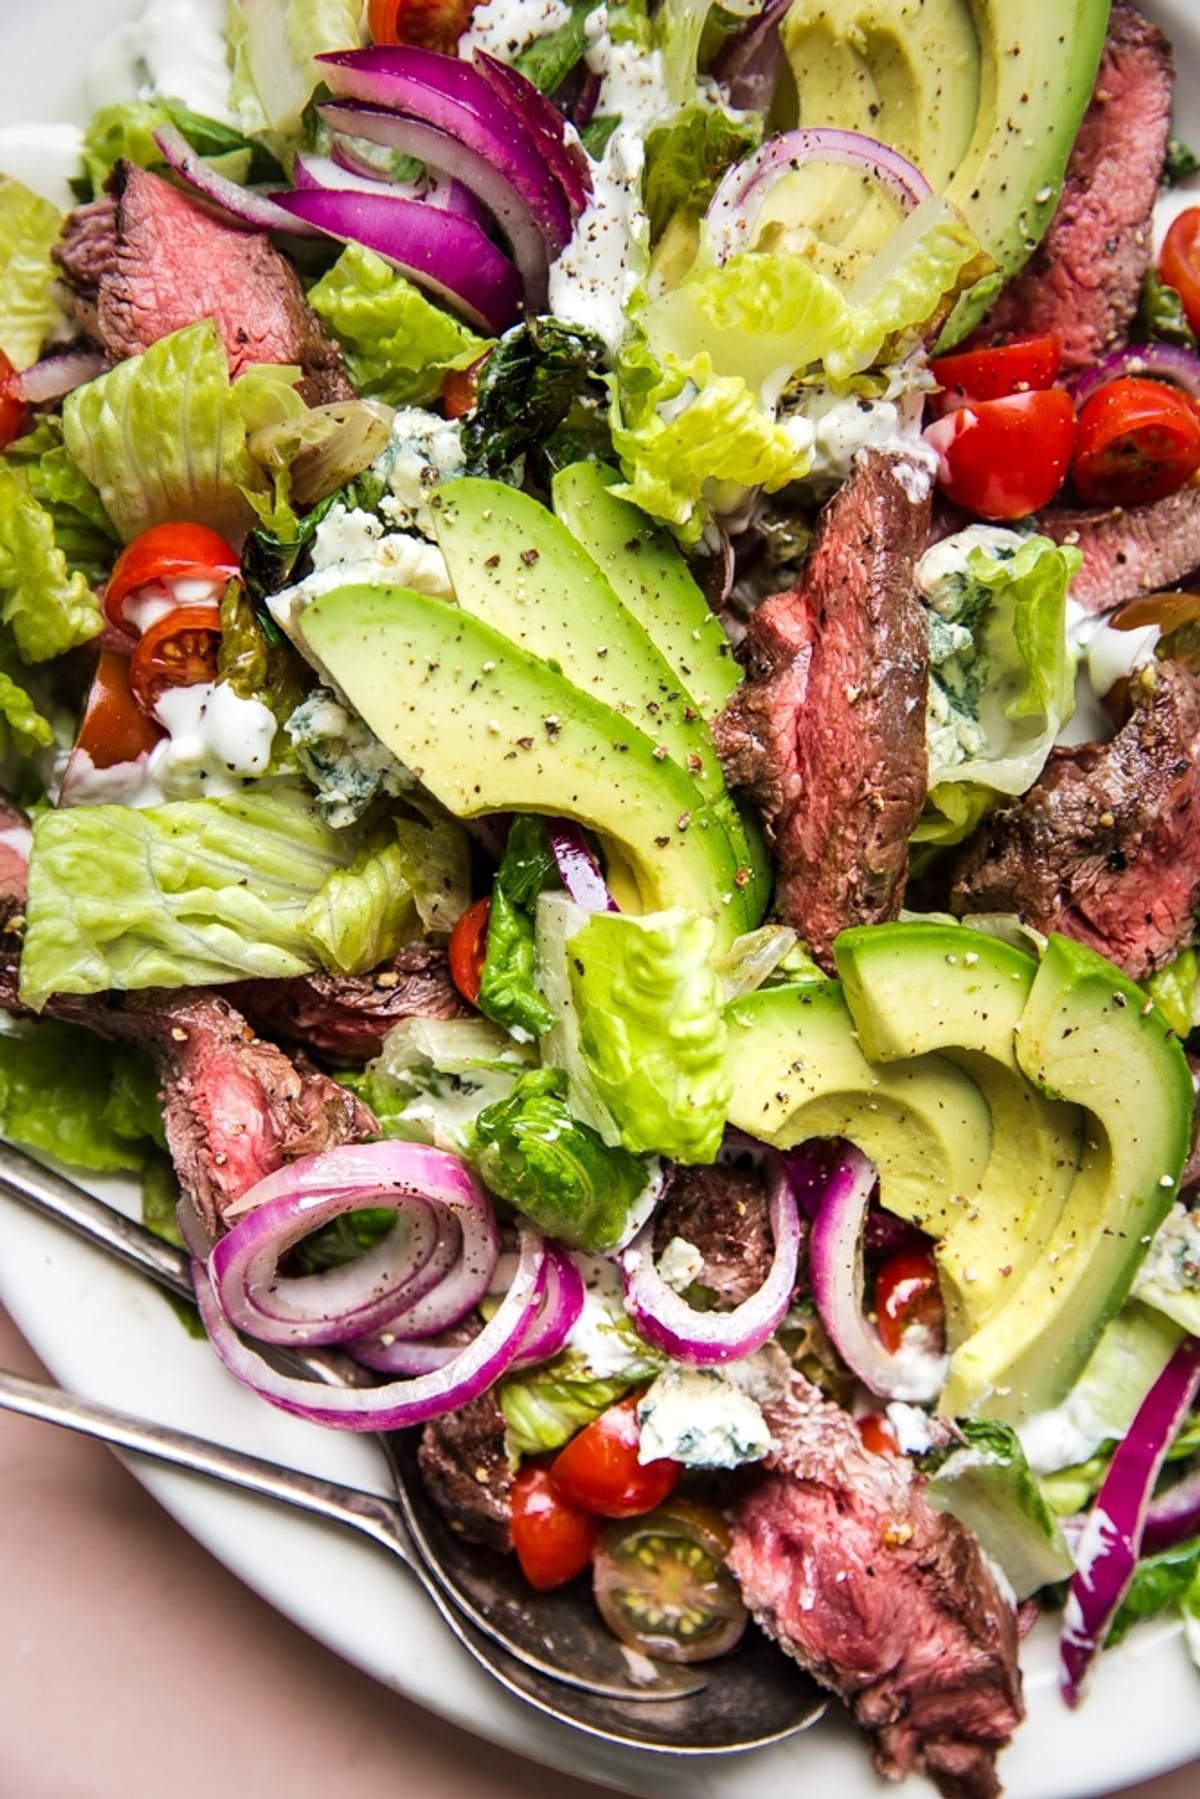 grilled steak salad with avocados, onions, tomatoes and a homemade blue cheese dressing on a large plate